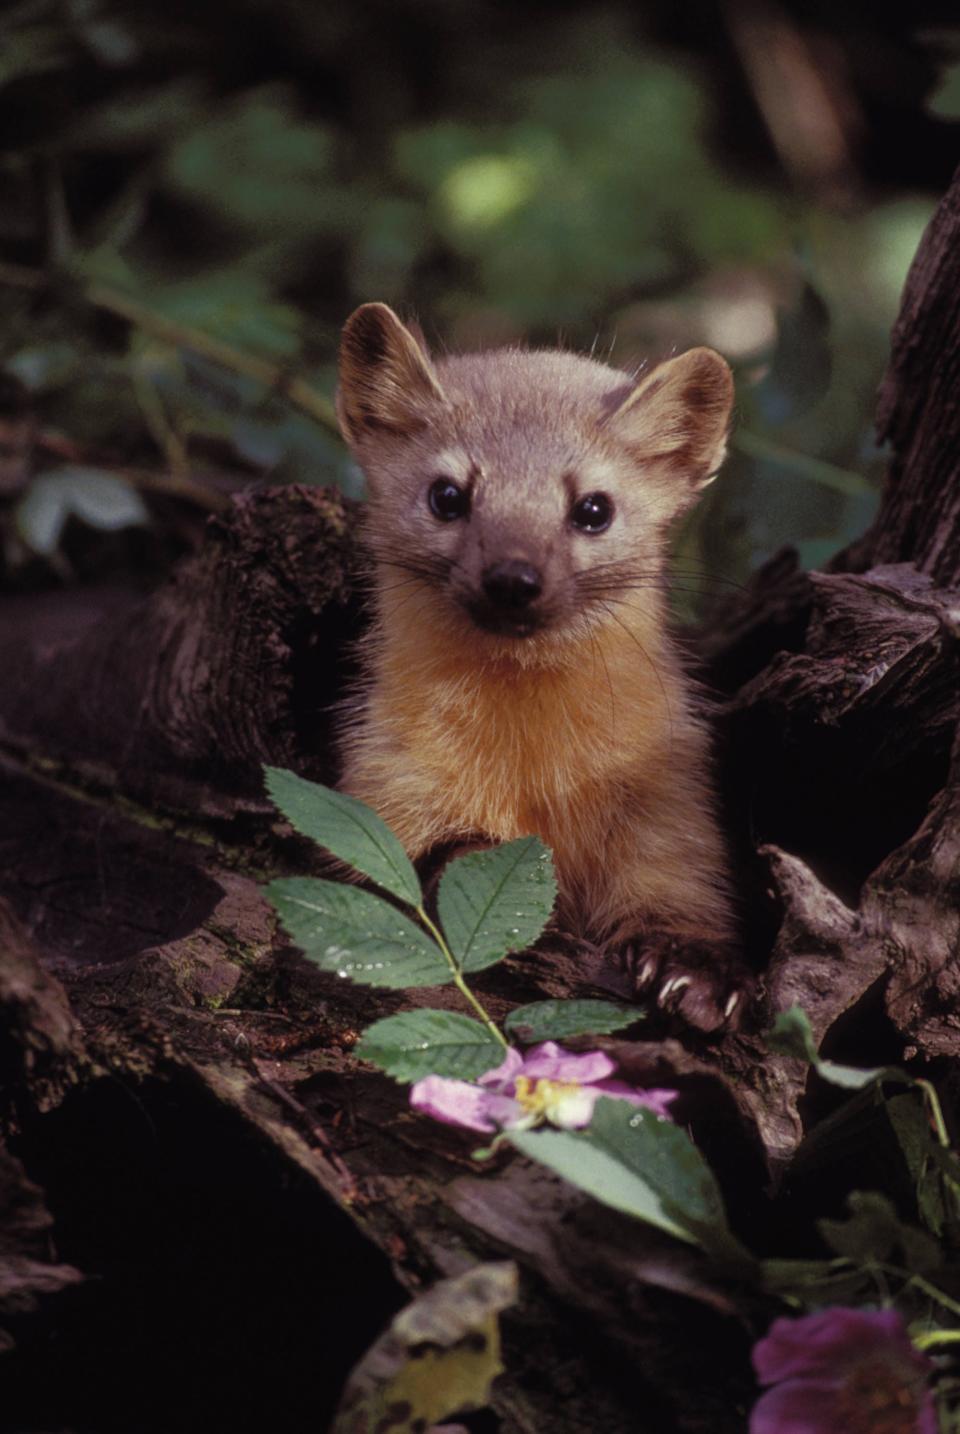 The American marten, also known as a pine marten, is listed as an endangered species in Wisconsin.